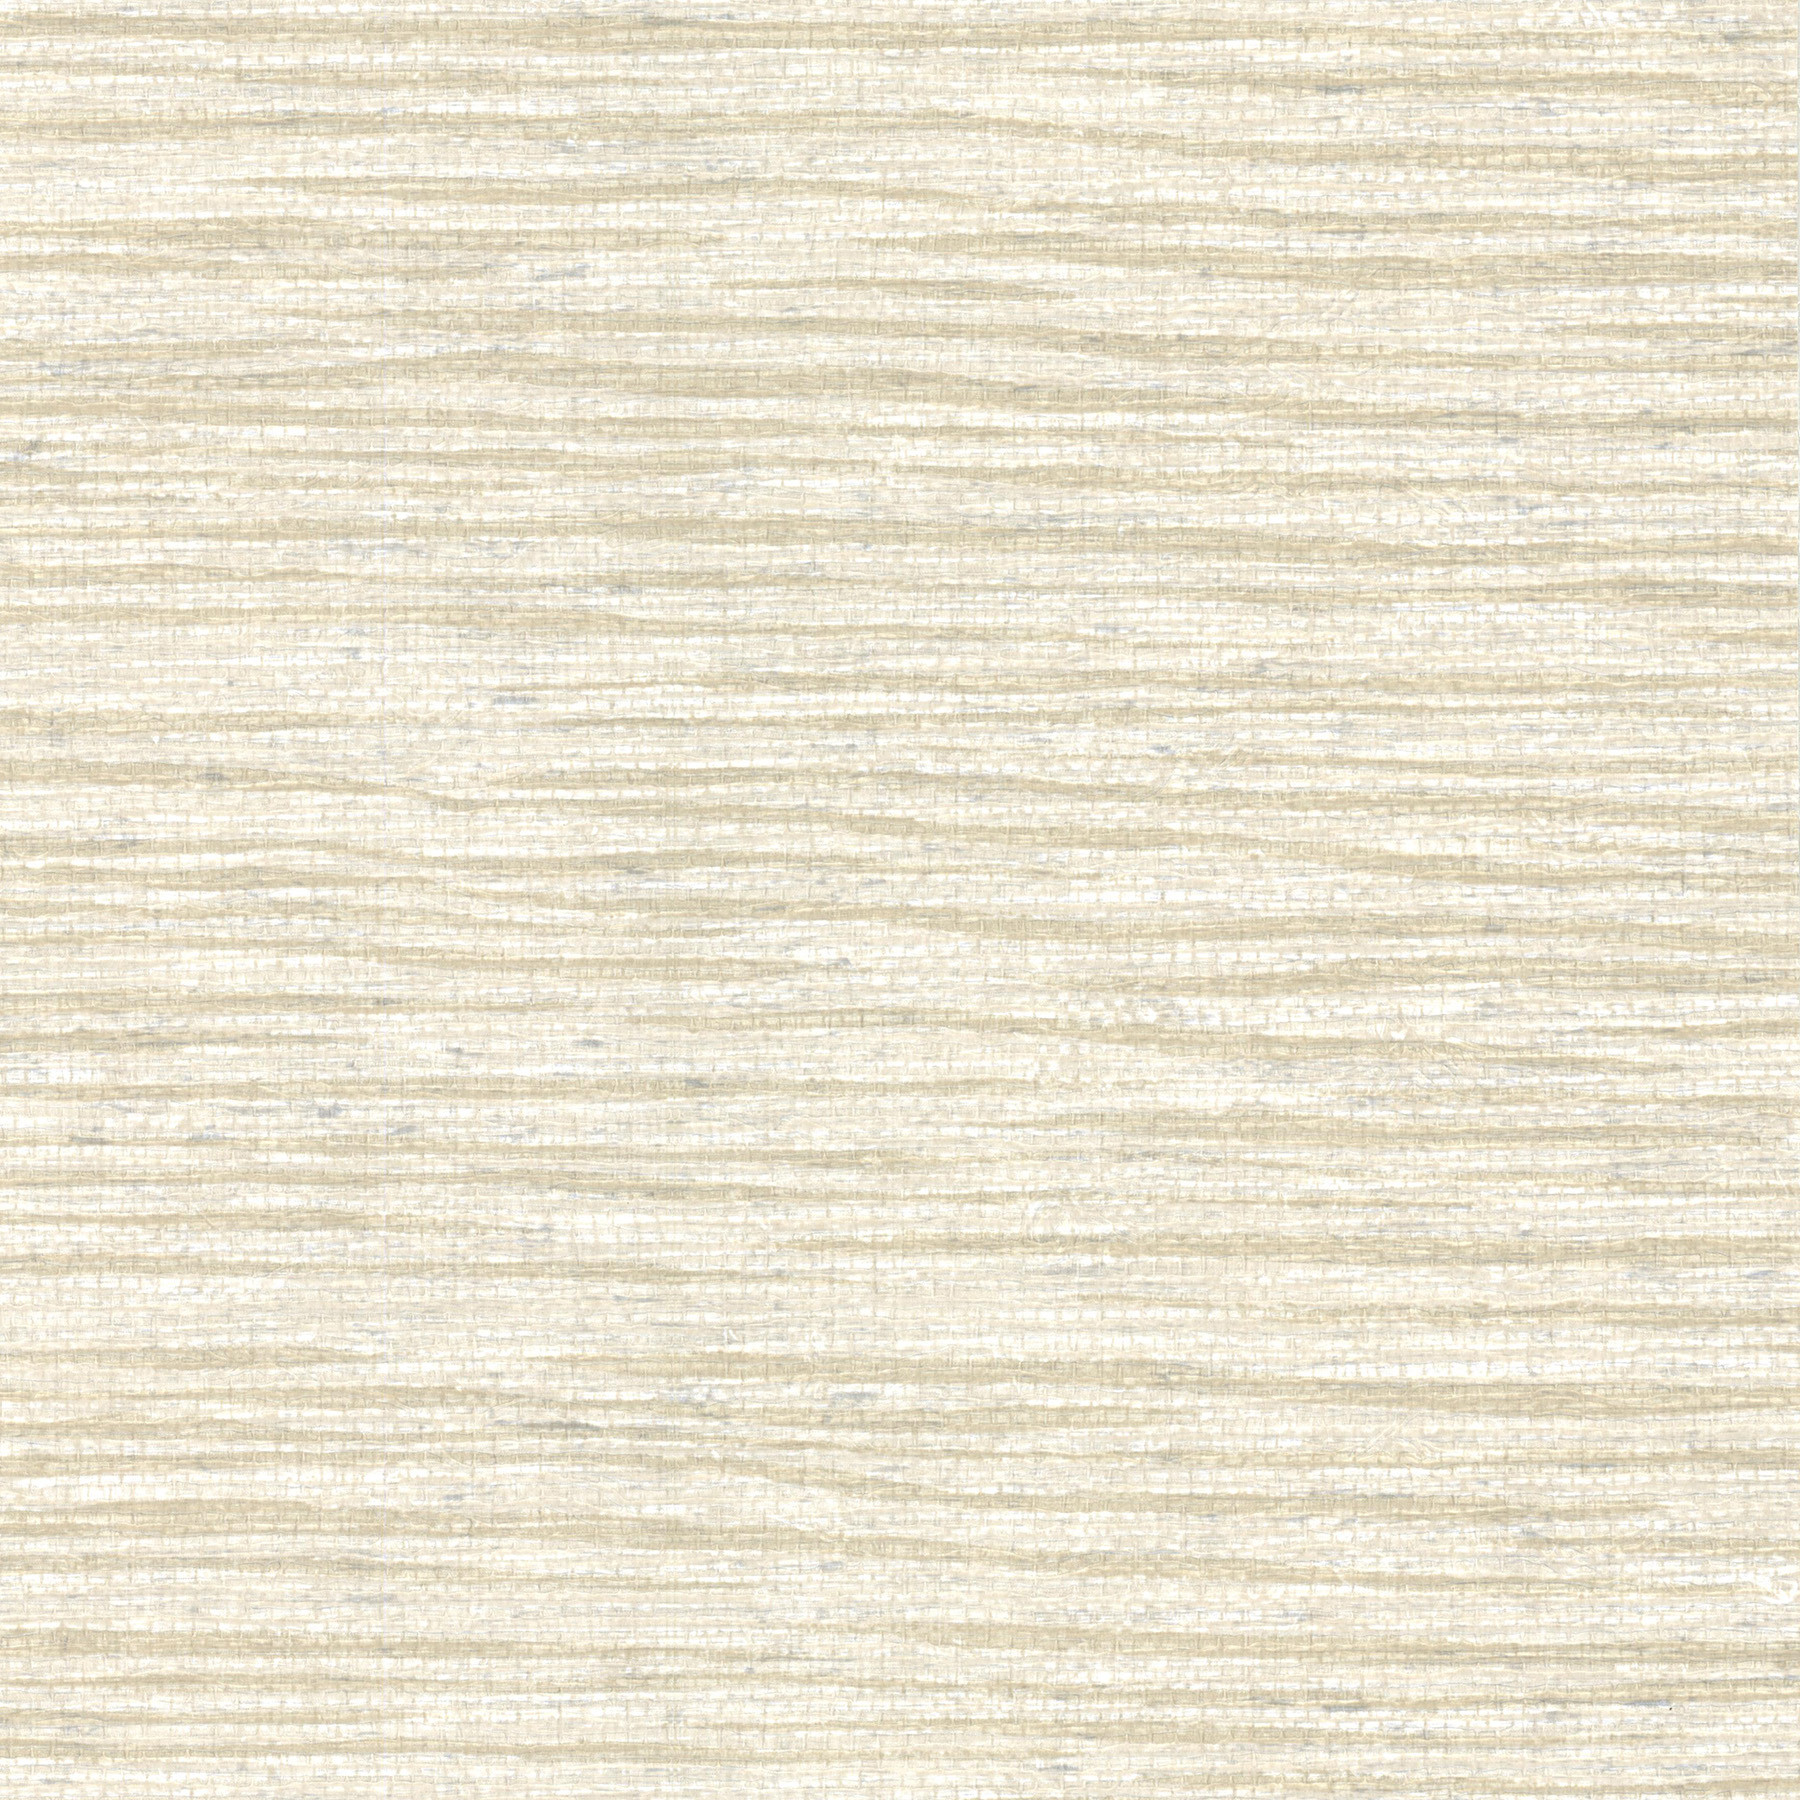 Cortina Iii Allen Scrubbable And Strippable Faux Grasscloth Wallpaper